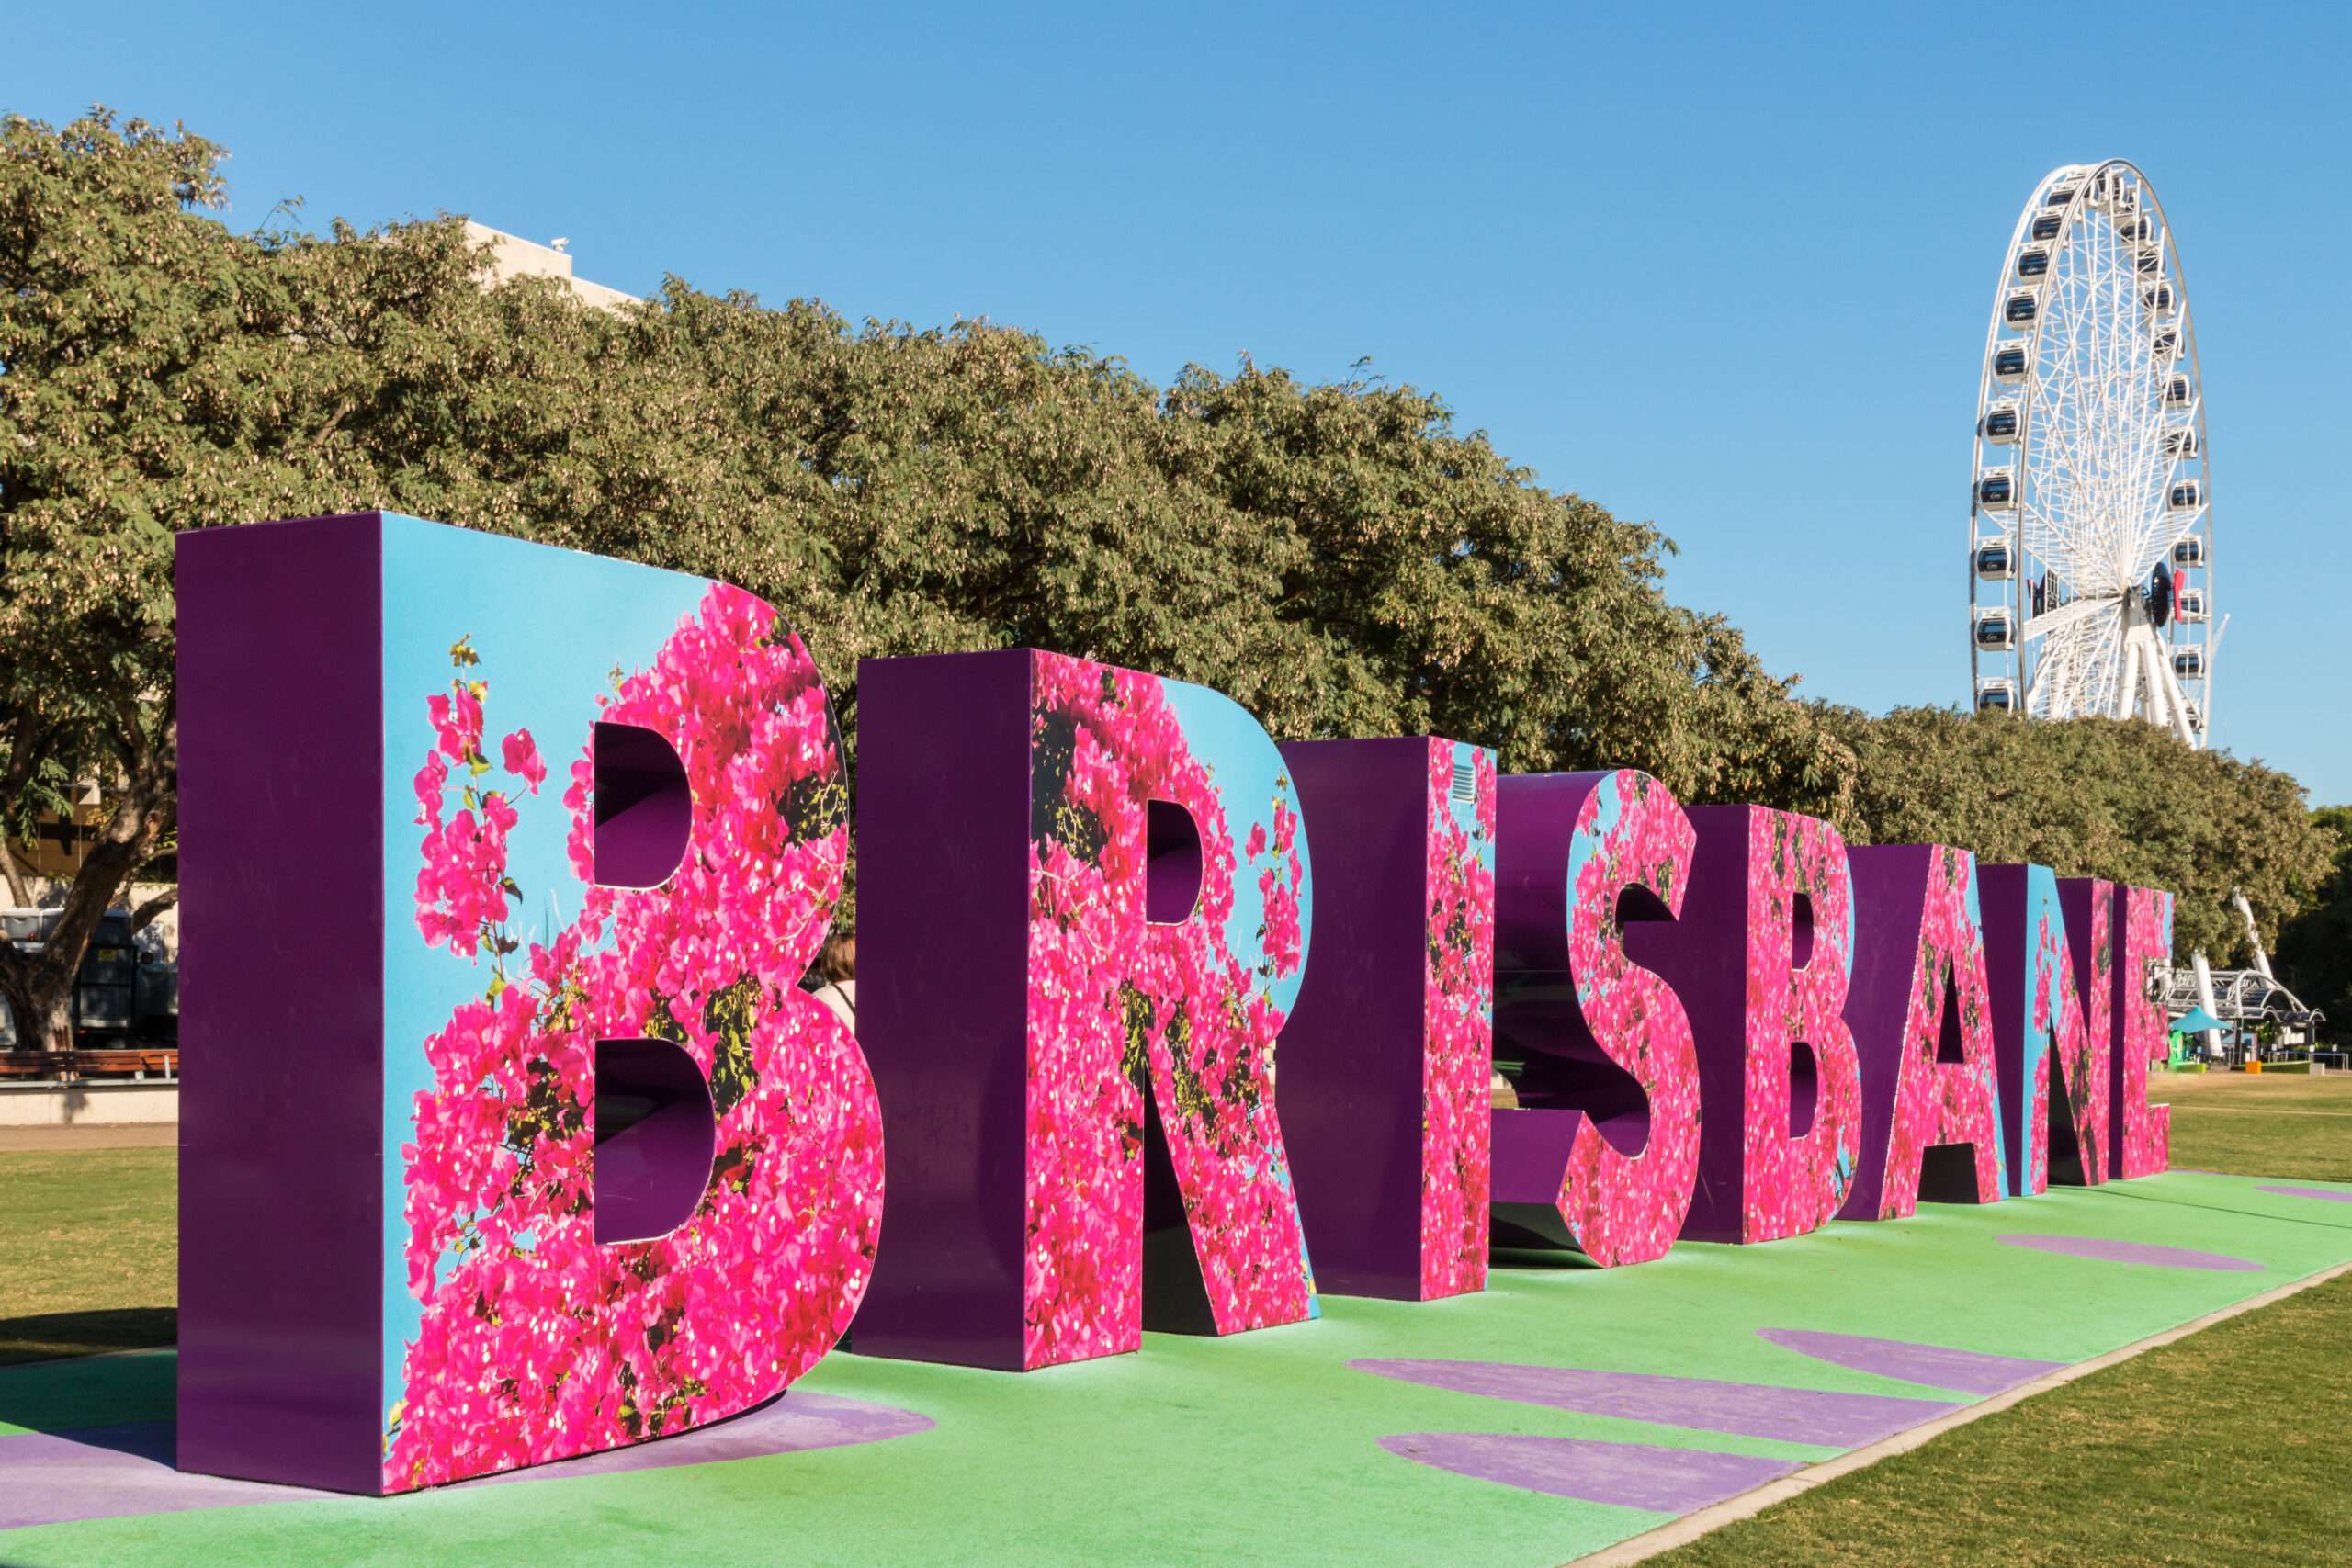 The Brisbane sign with the big wheel in the background